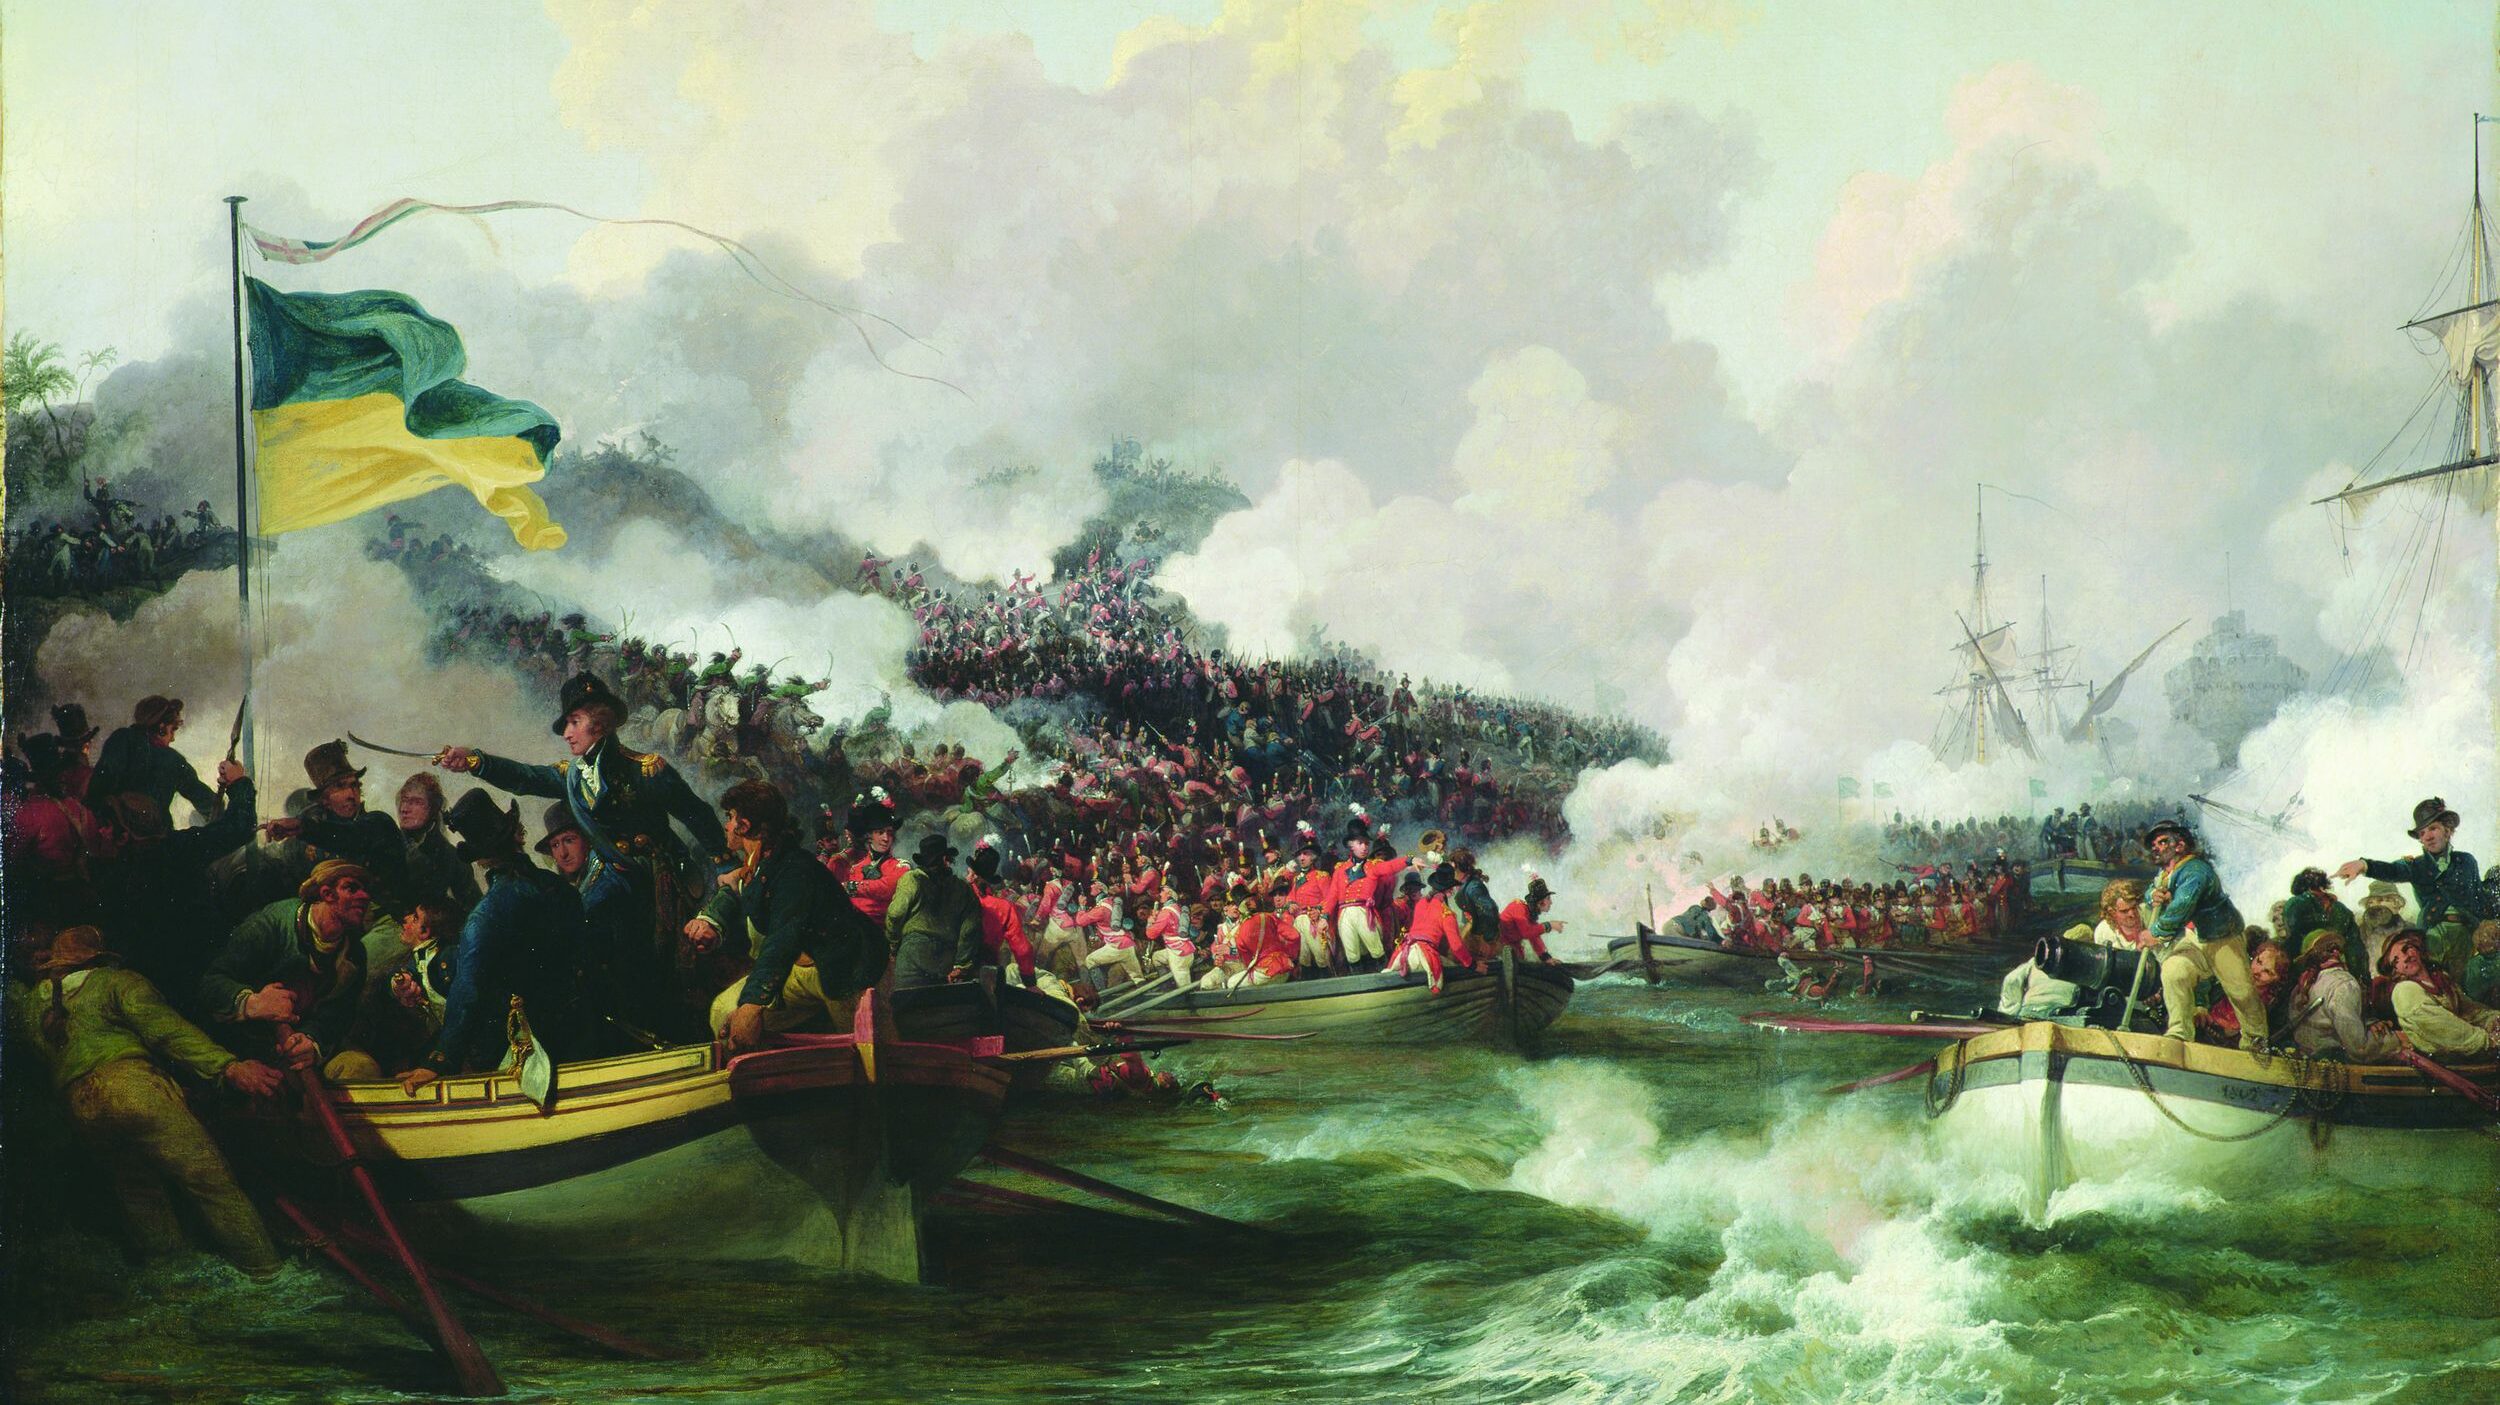 Burly bluejackets from the Royal Navy muscle the landing craft to shore during the British amphibious landing at Aboukir Bay, Egypt, on March 8, 1801, in this contemporary oil painting by Philippe Jacques de Loutherbourg.